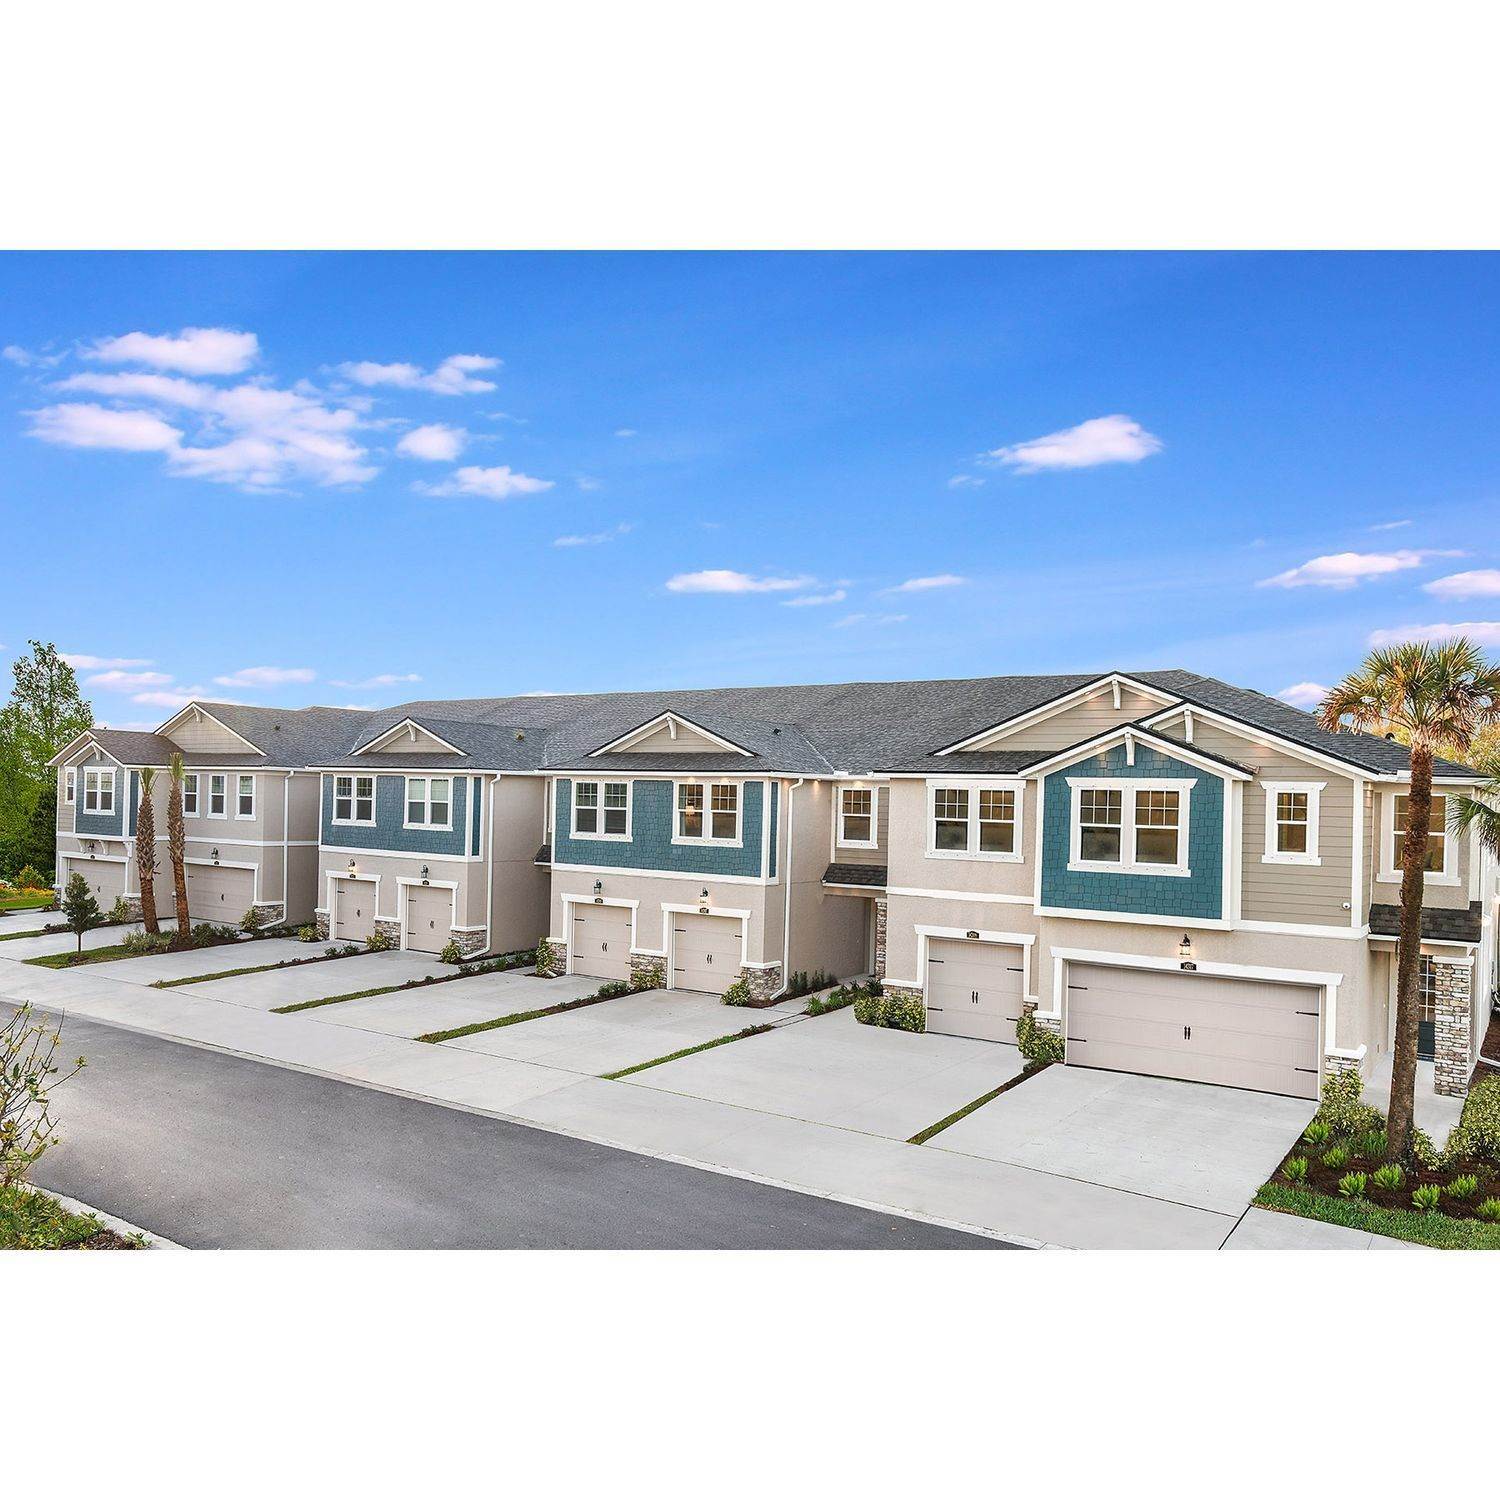 Multi Family for Sale at Lutz, FL 33558